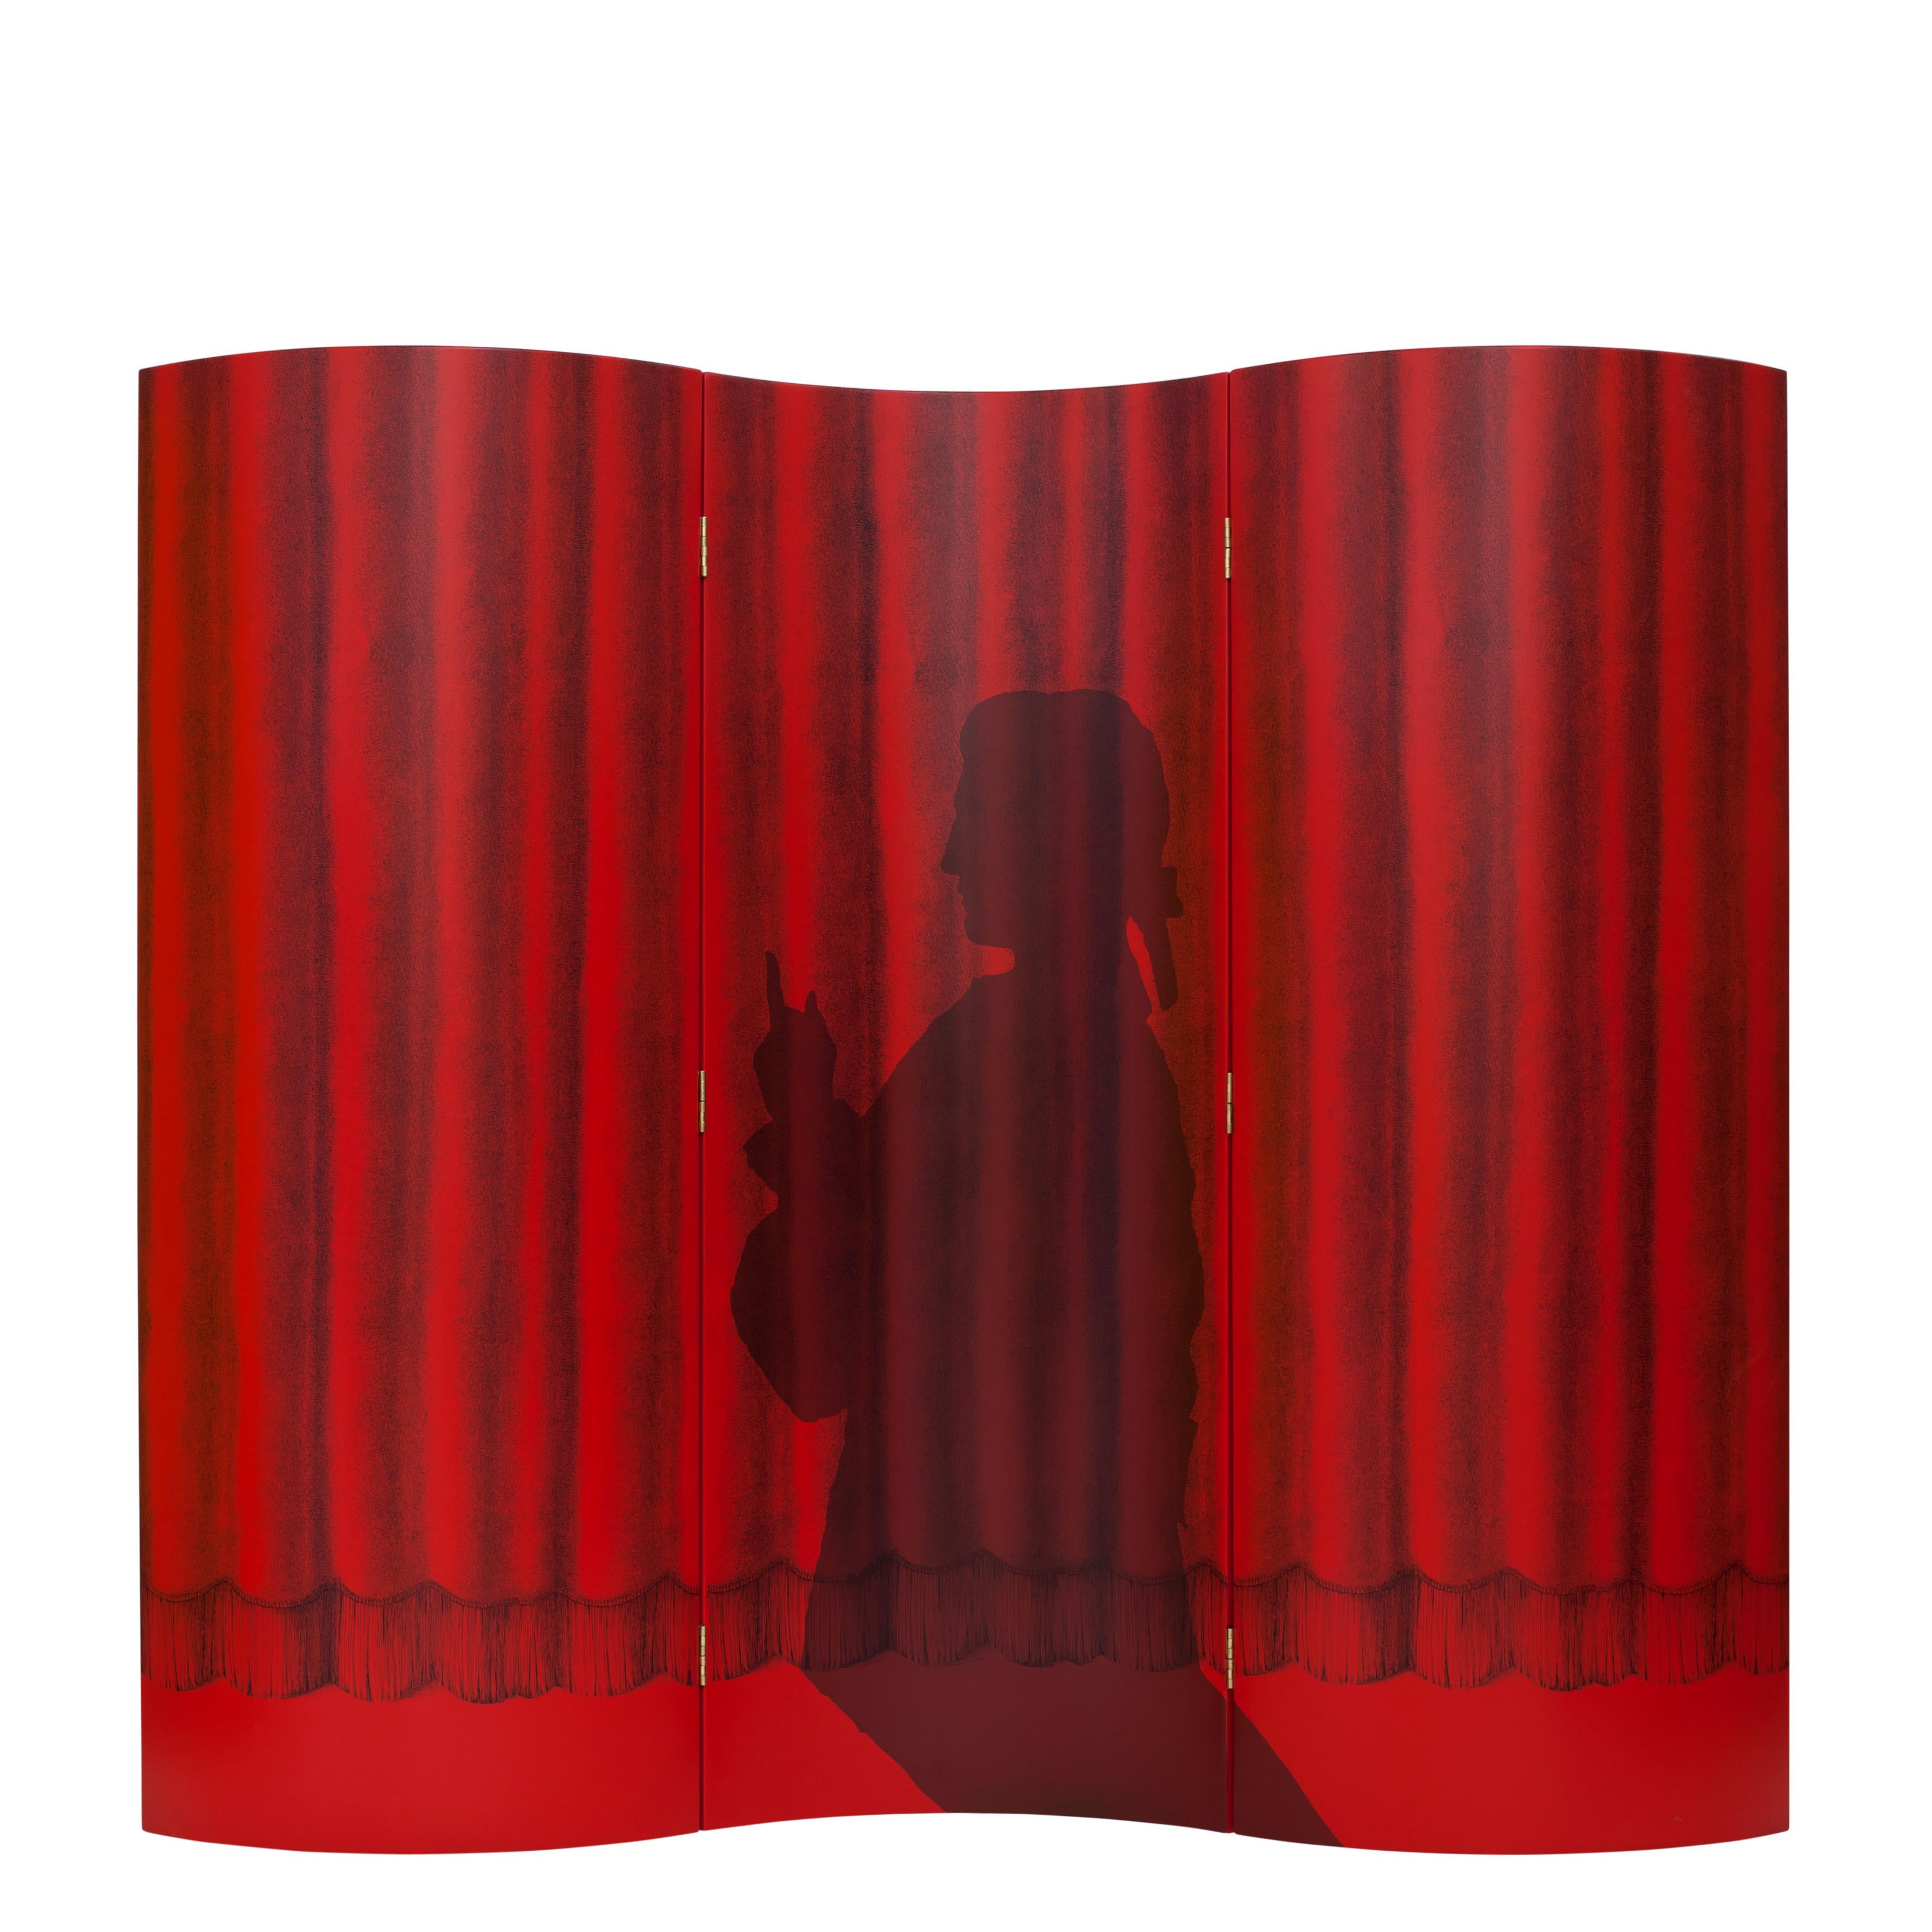 Screens have been a significant part of the Fornasetti artstic production since the founding of the Atelier in the 1950s. Since then, Fornasetti uses screens to redesign spaces through his imaginative designs.
All Fornasetti home accessories are